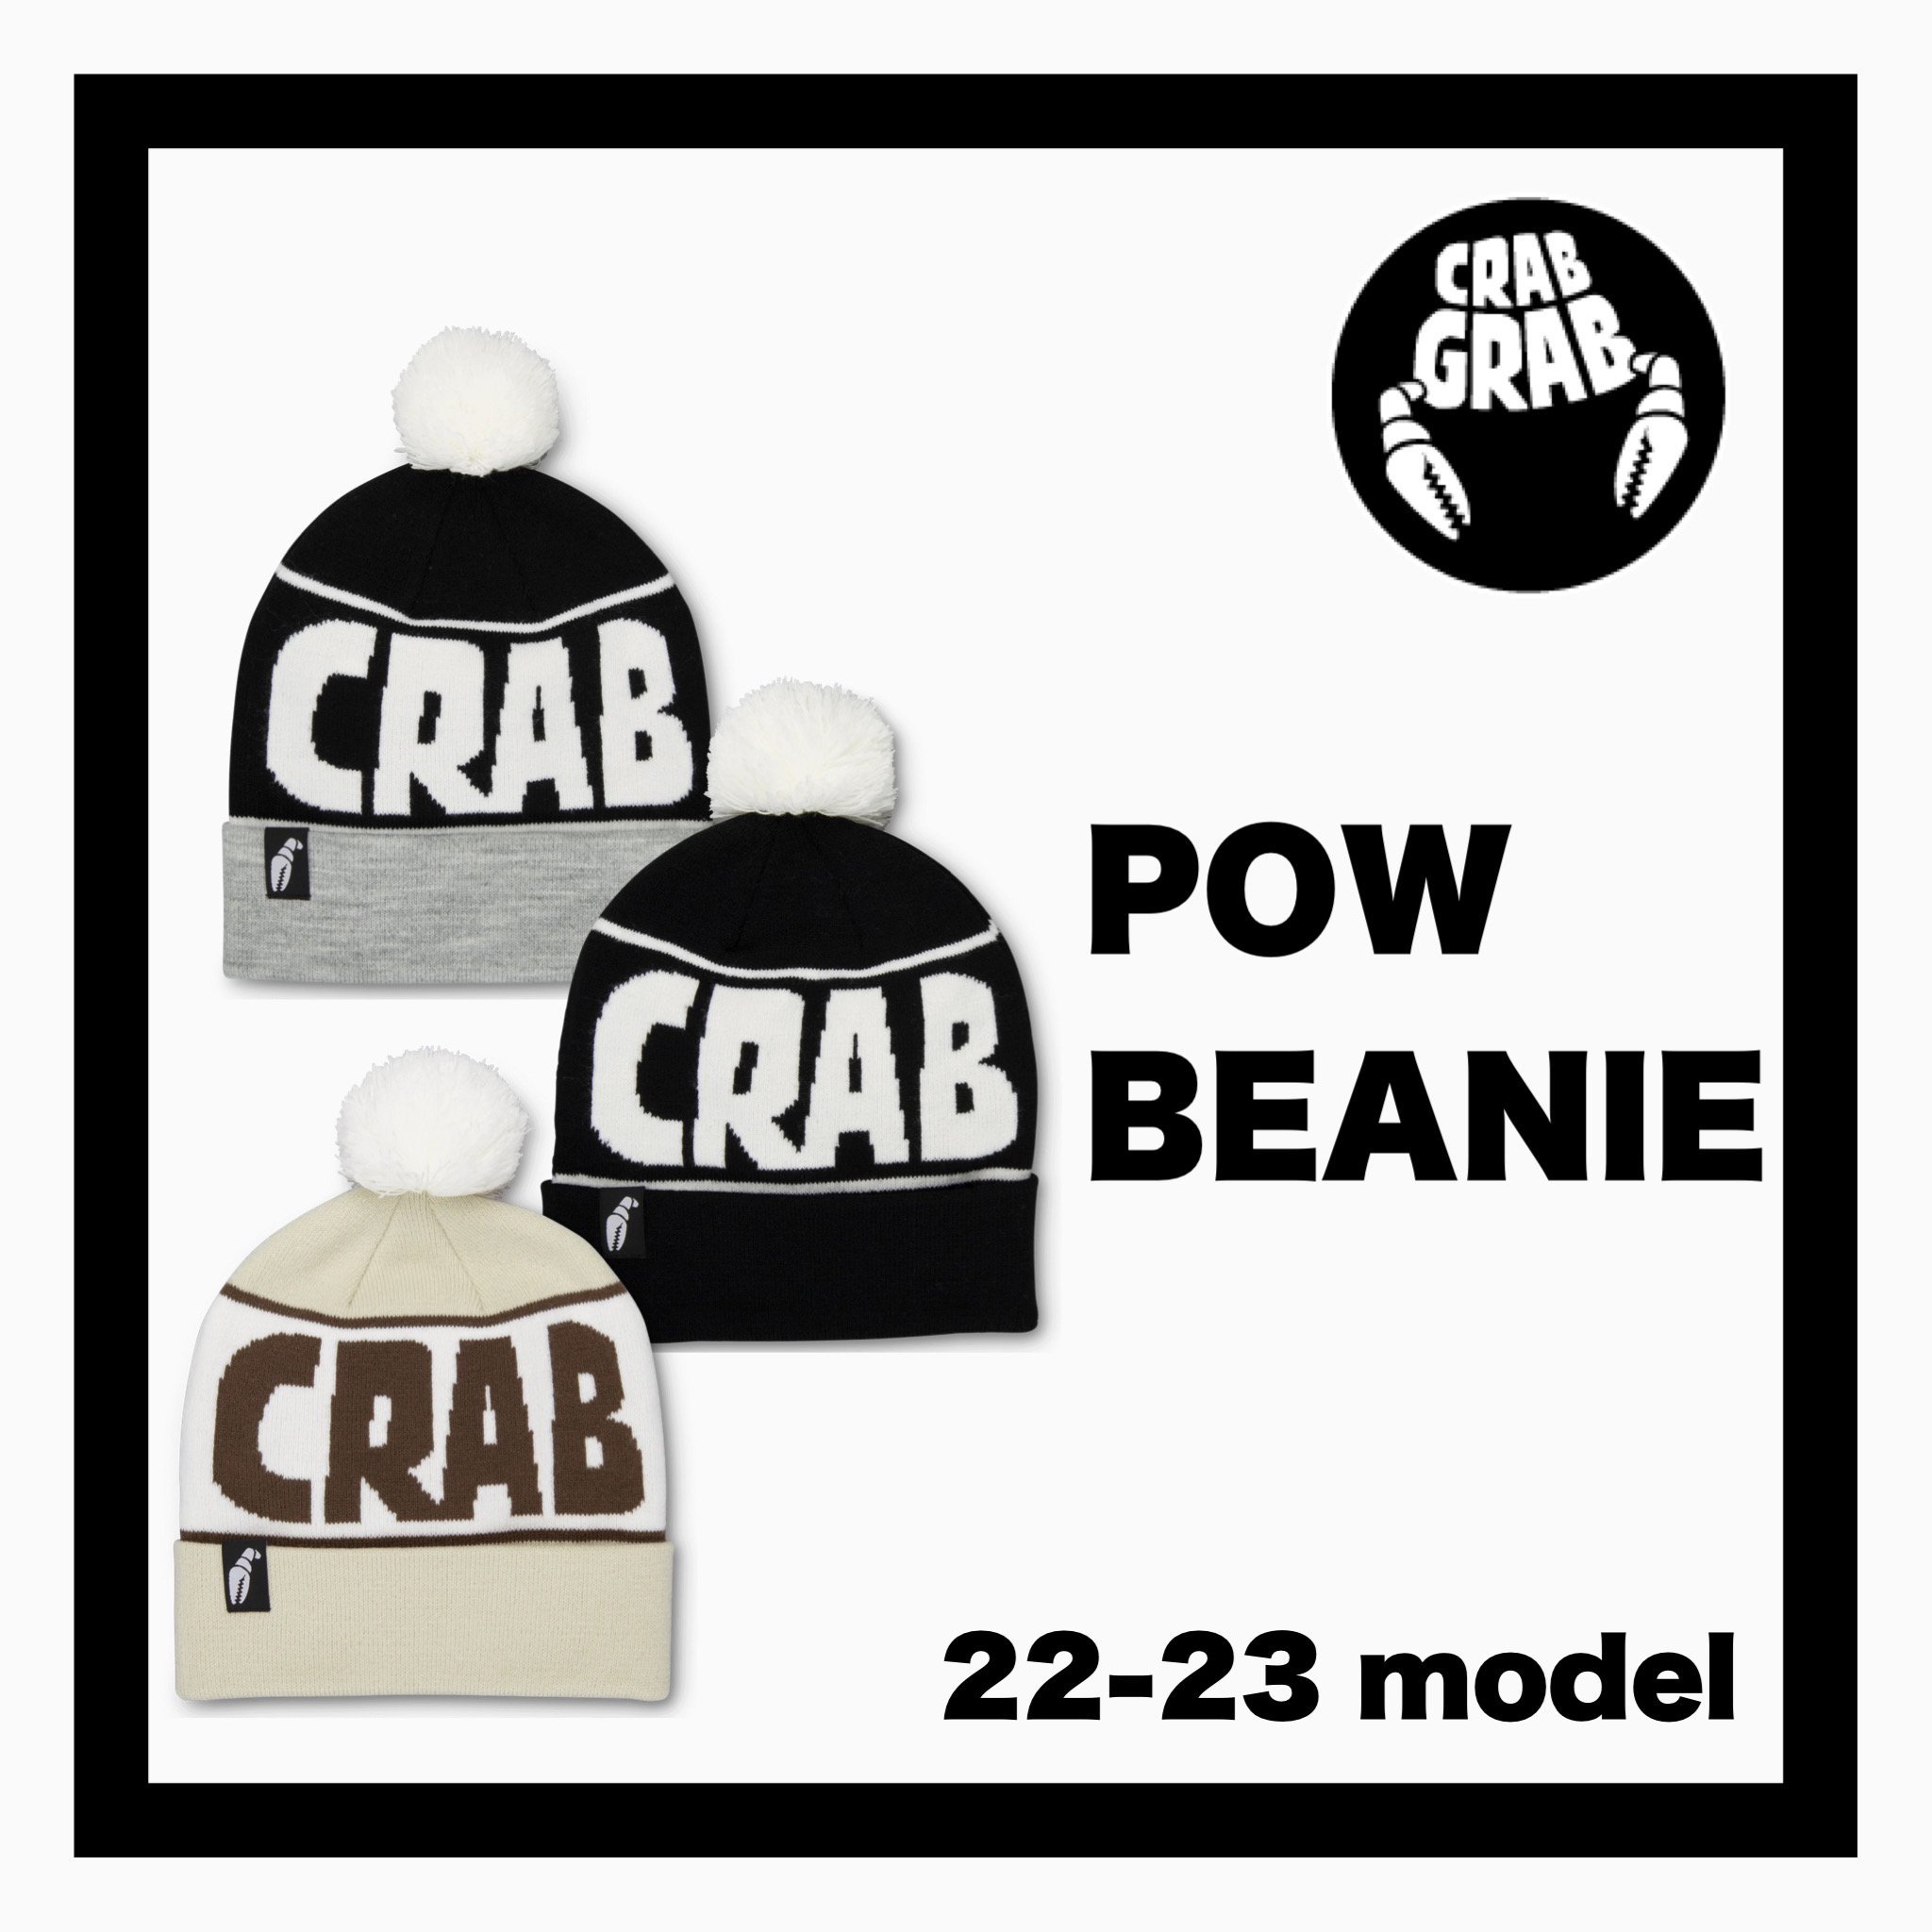 <img class='new_mark_img1' src='https://img.shop-pro.jp/img/new/icons14.gif' style='border:none;display:inline;margin:0px;padding:0px;width:auto;' />CRAB GRABPOW BEANIE